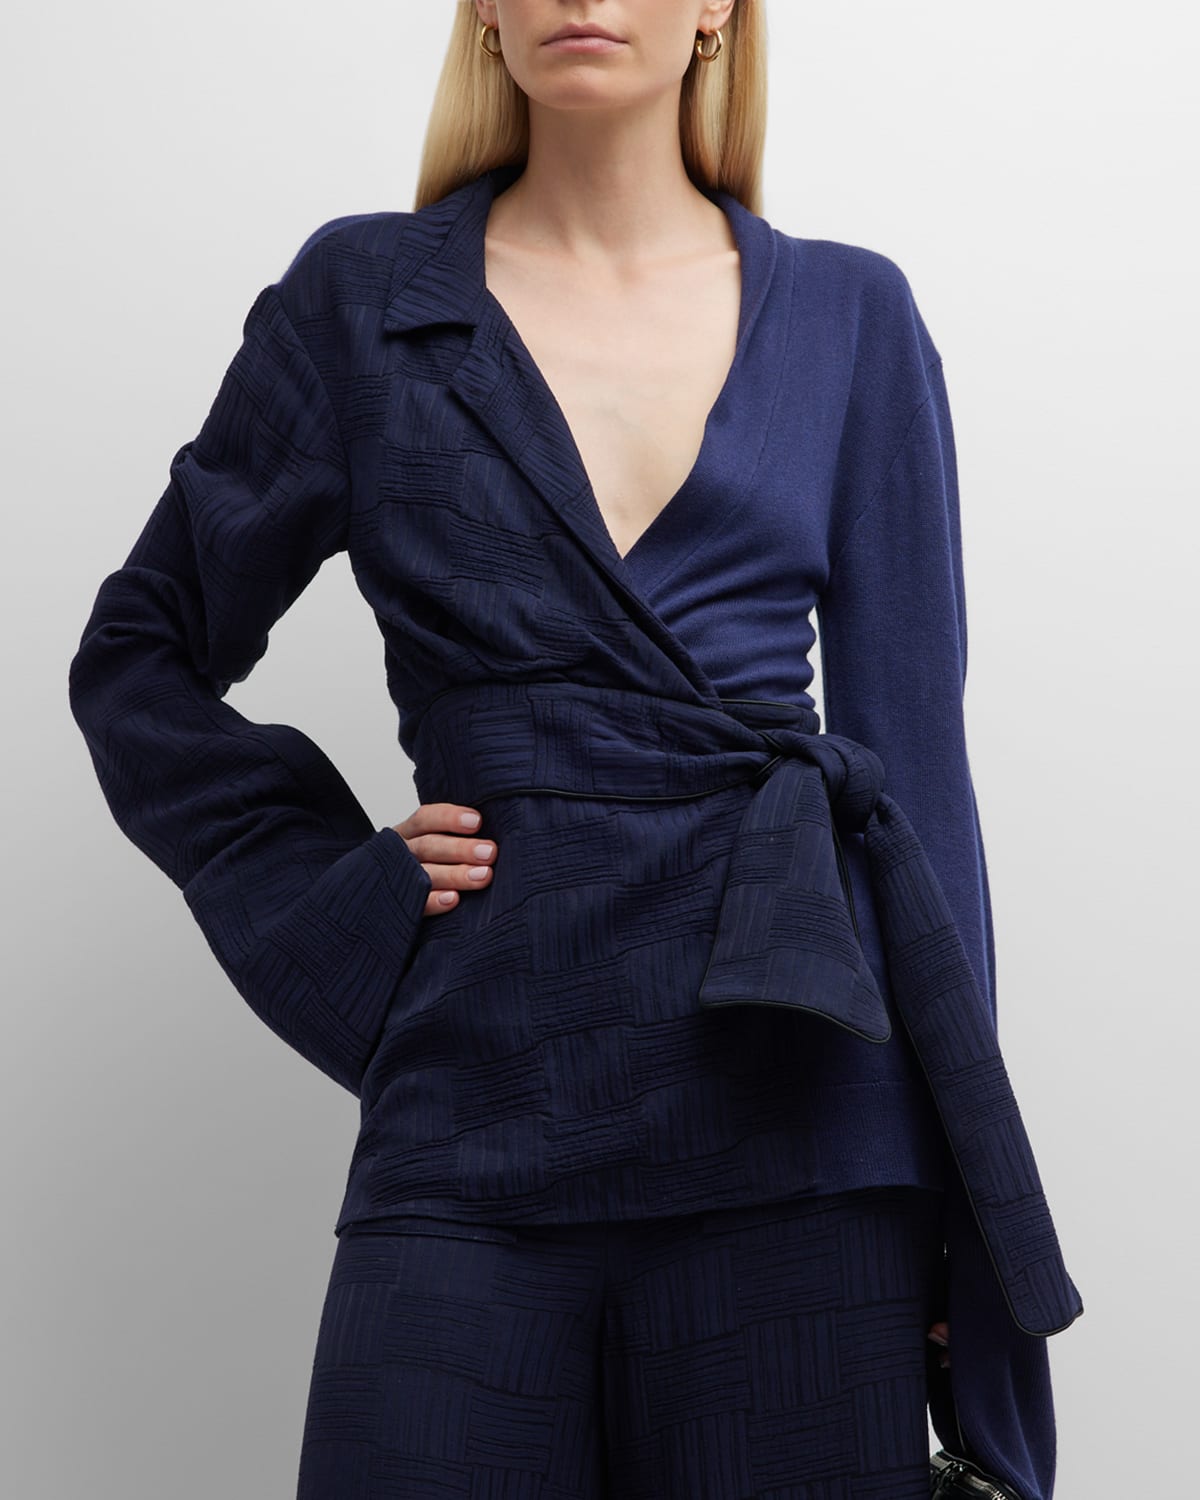 Hellessy Hester Mixed-Media Cashmere Wrap Top